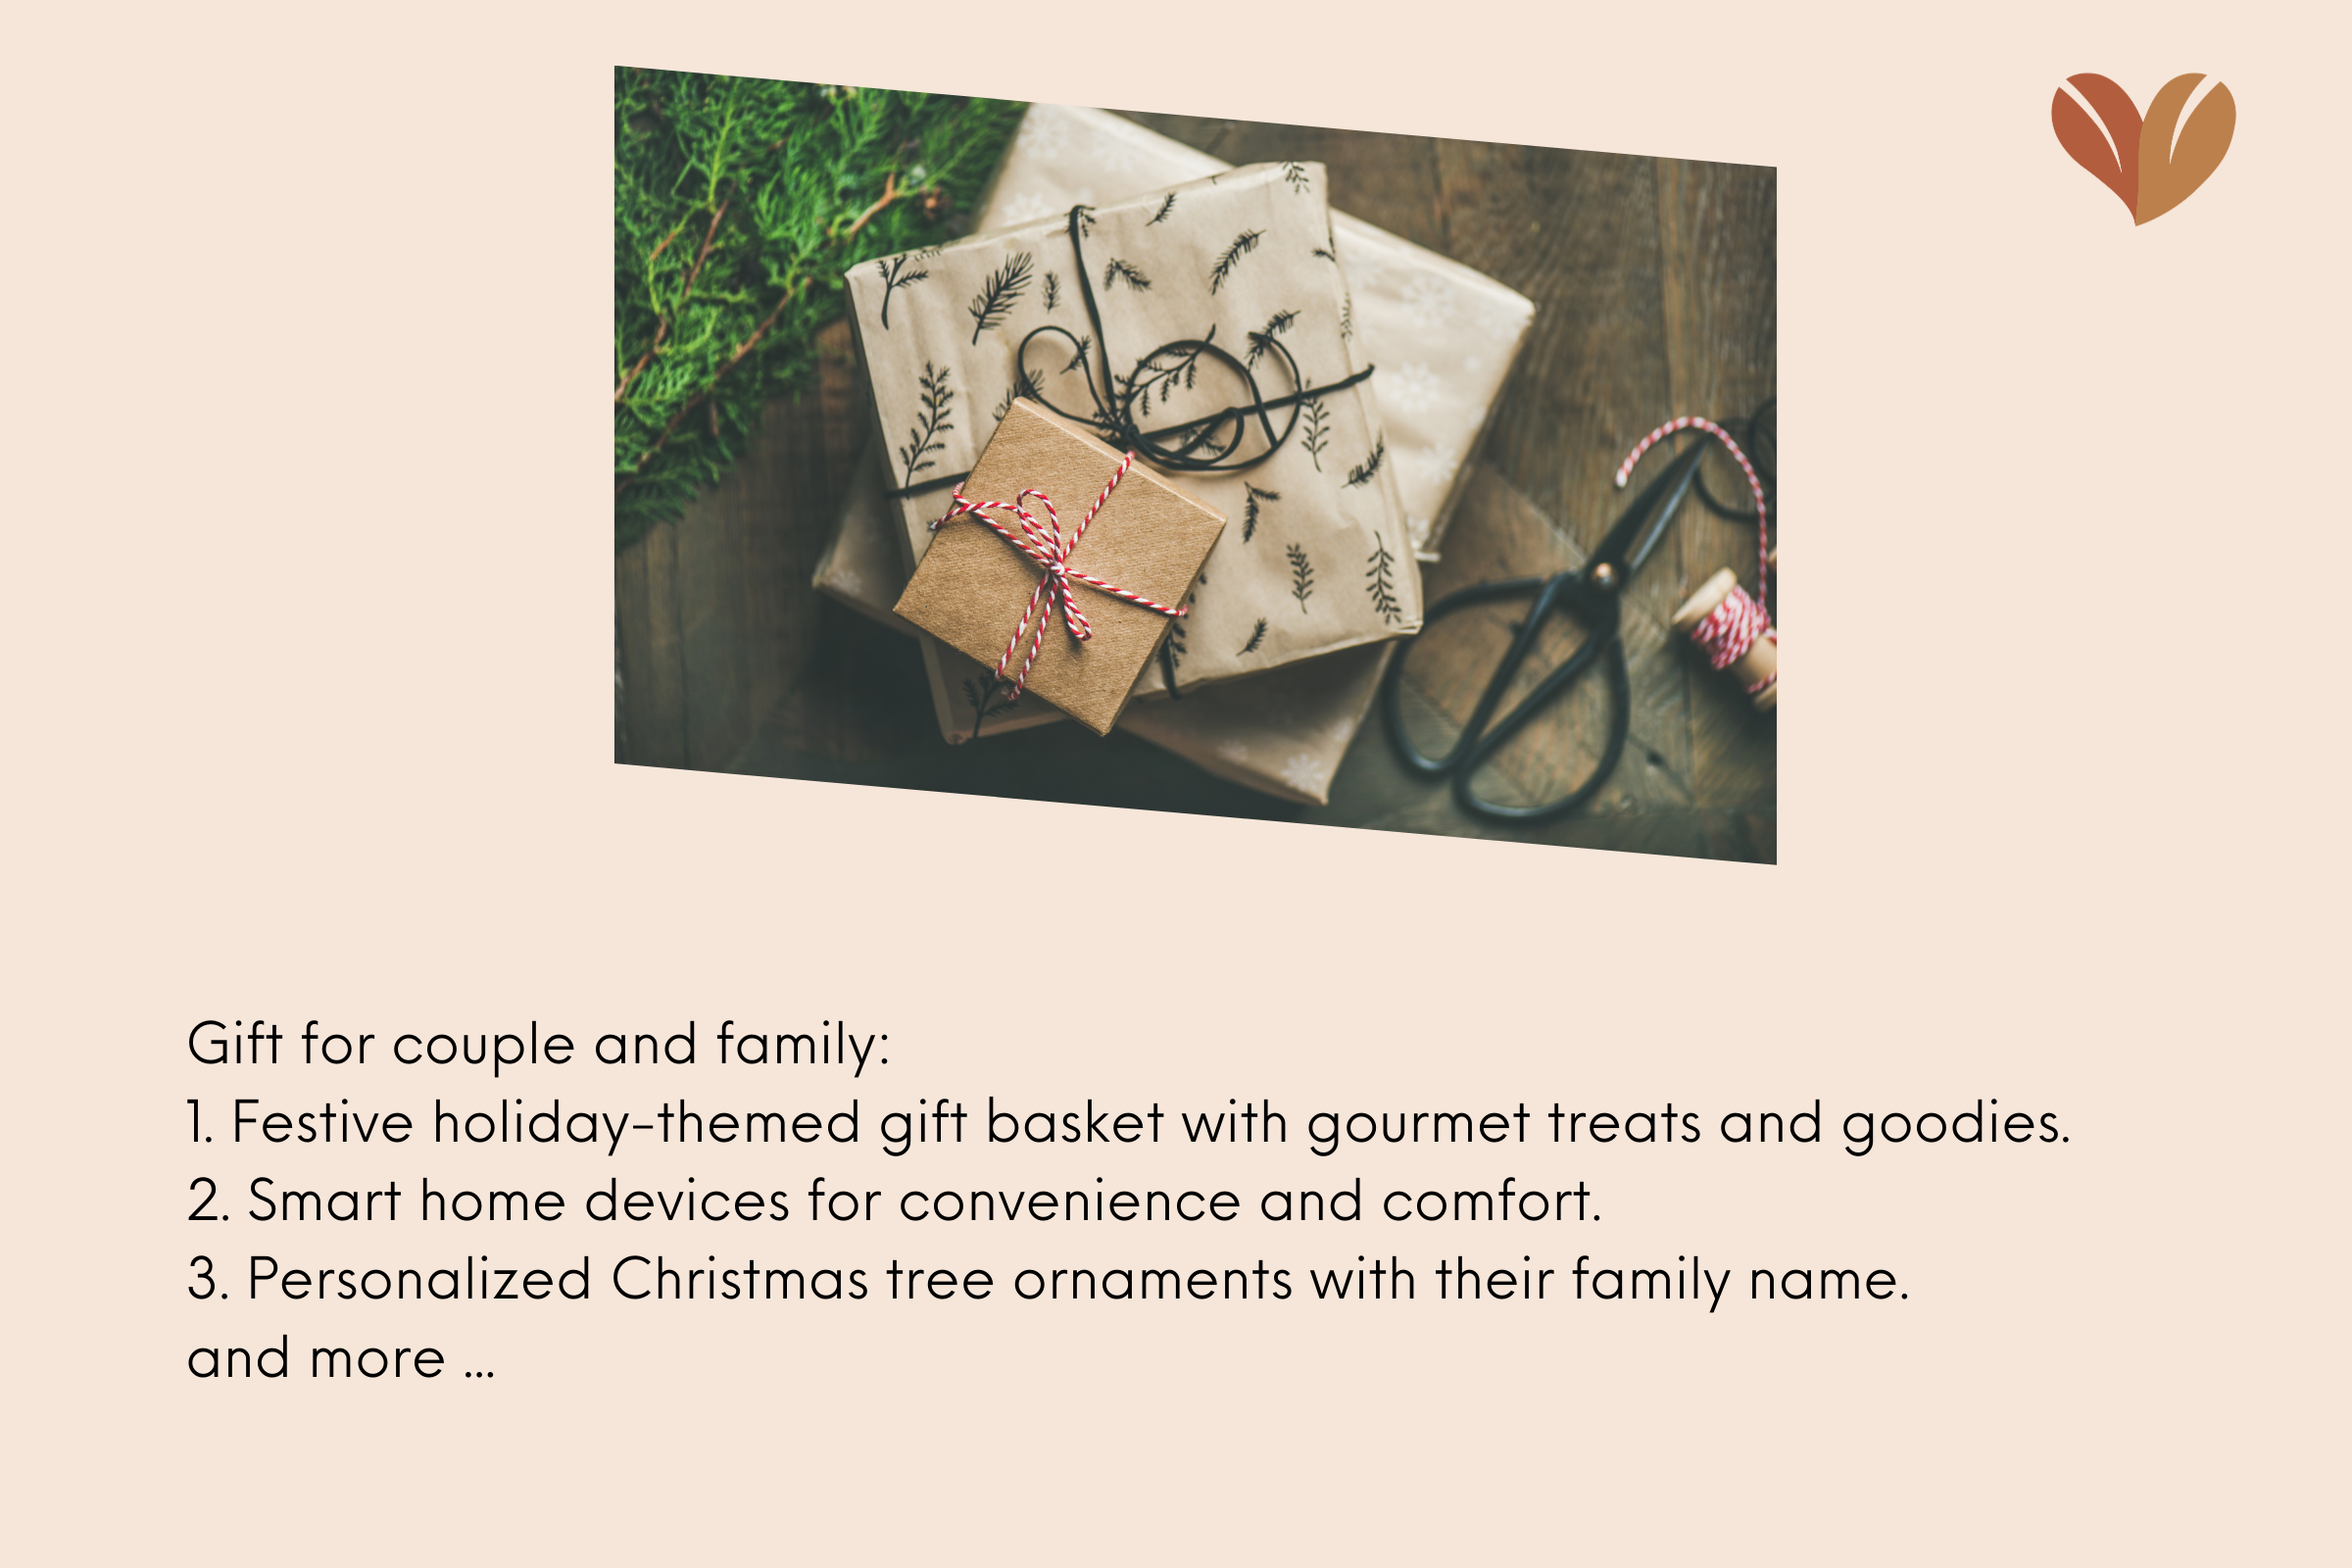 Suggested gifts for familly and couple